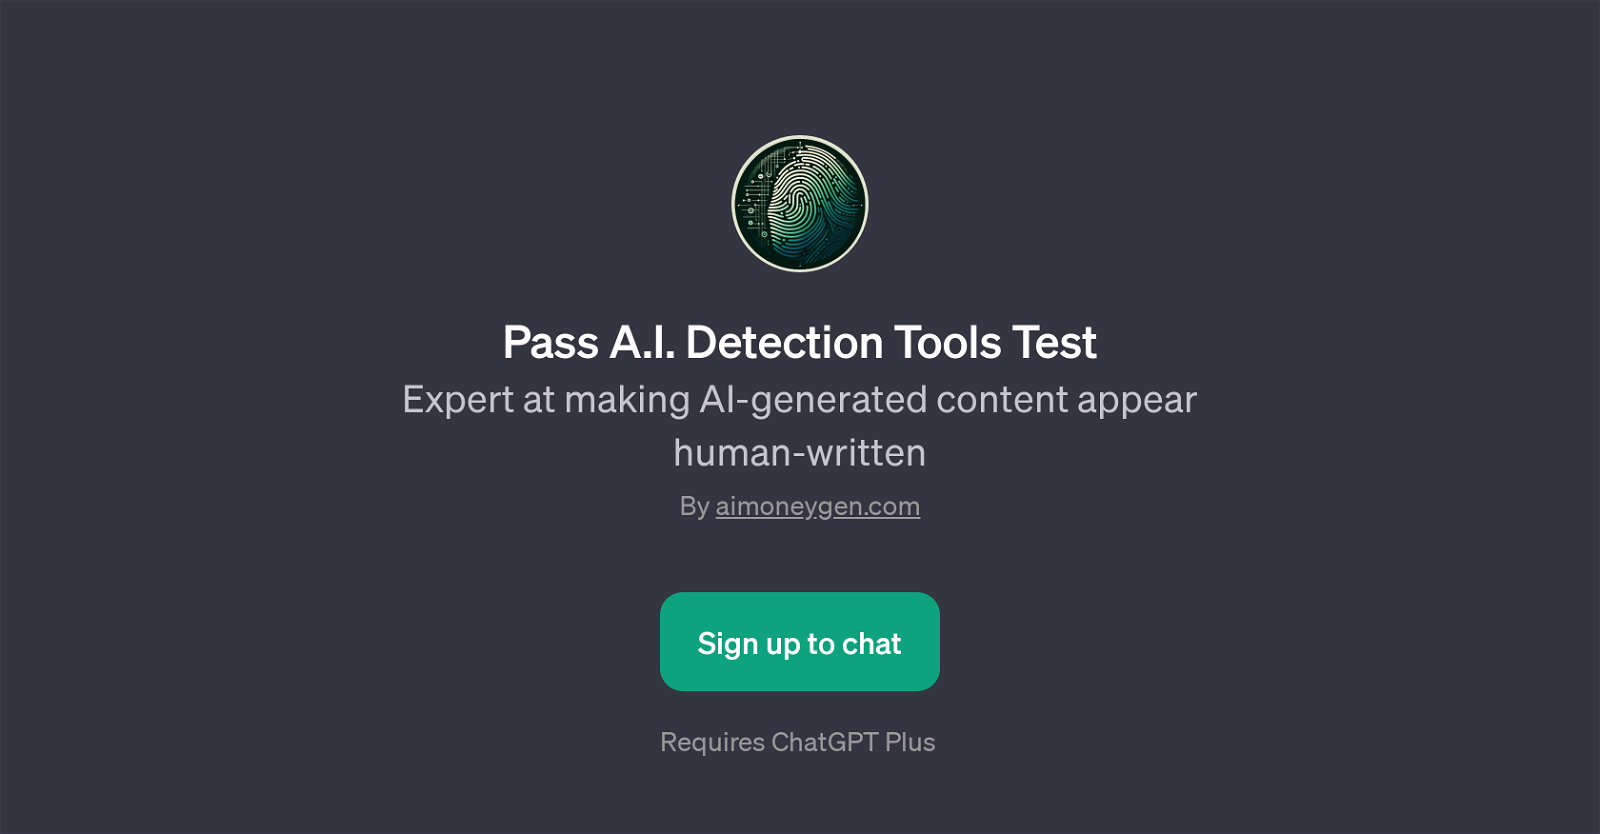 Pass A.I. Detection Tools Test website